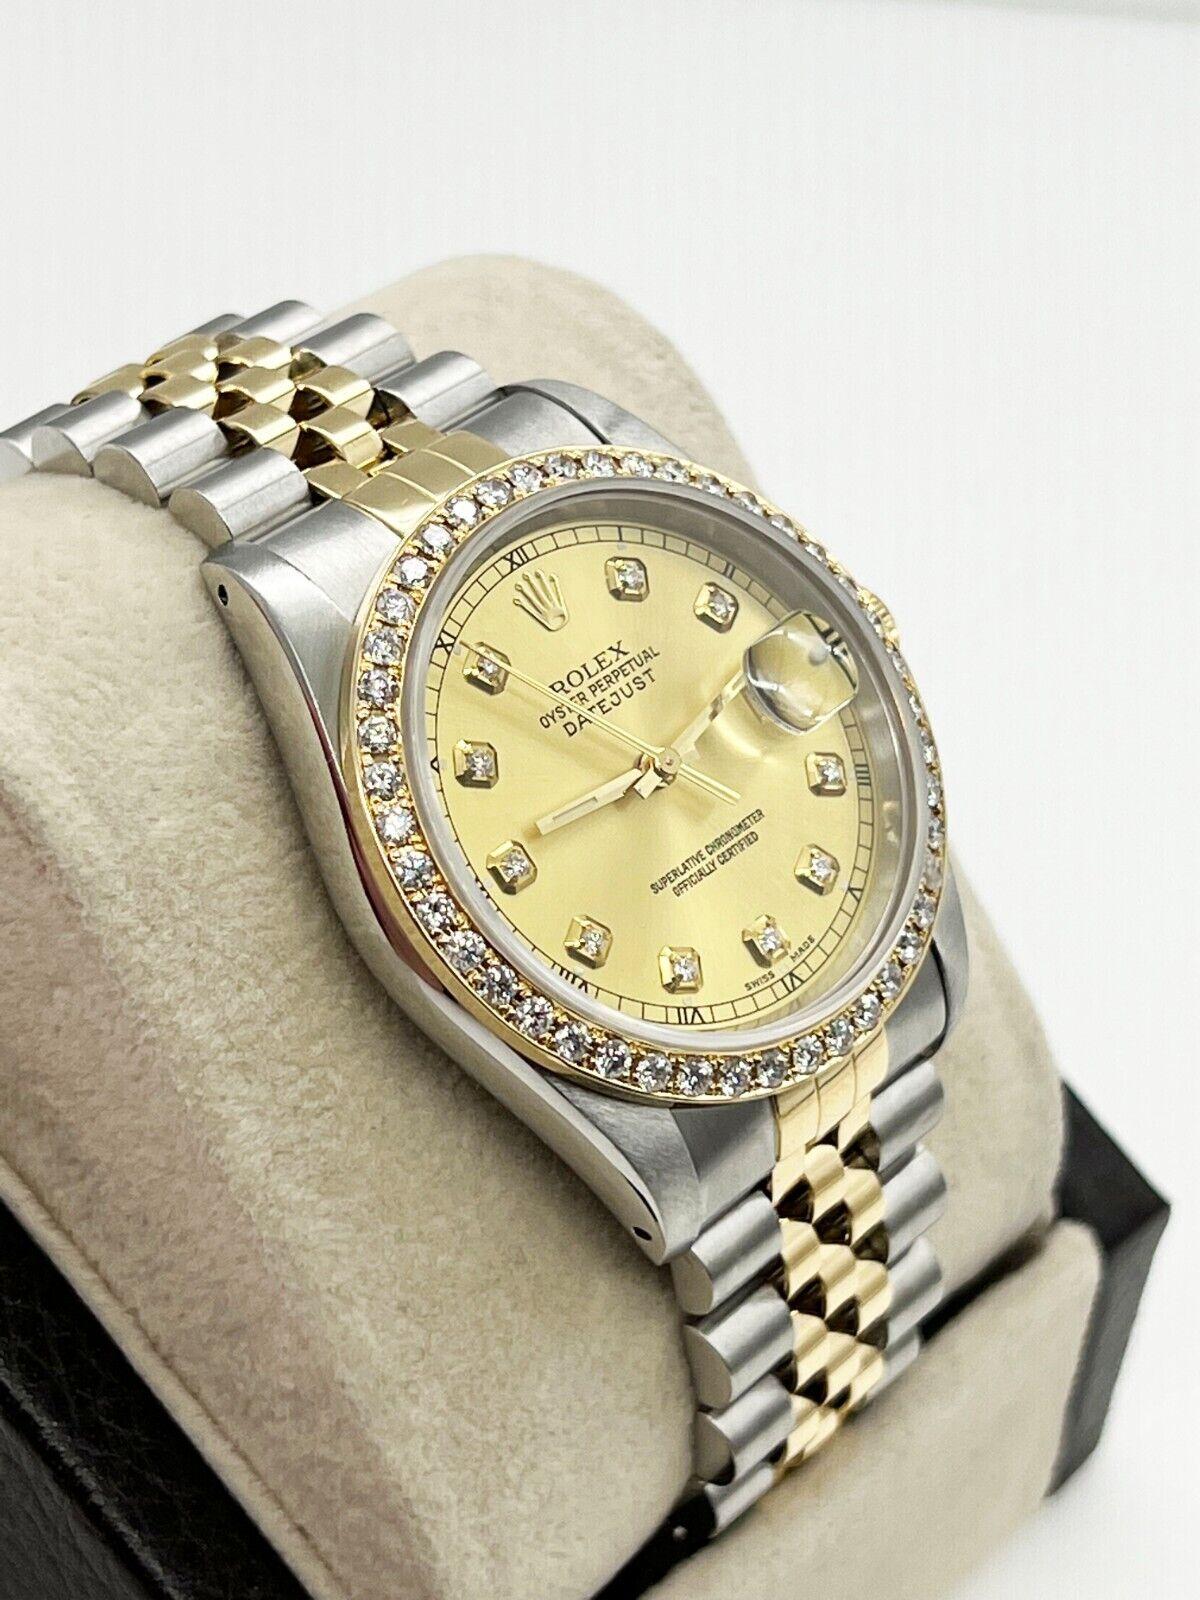 Style Number: 16233

Serial: R979***

Year: 1988 

Model: Datejust 

Case Material: Stainless Steel  

Band: 18K Yellow Gold & Stainless Steel  

Bezel: Custom Bezel  

Dial: Refinished Champagne Diamond Dial  

Face: Sapphire Crystal  

Case Size: